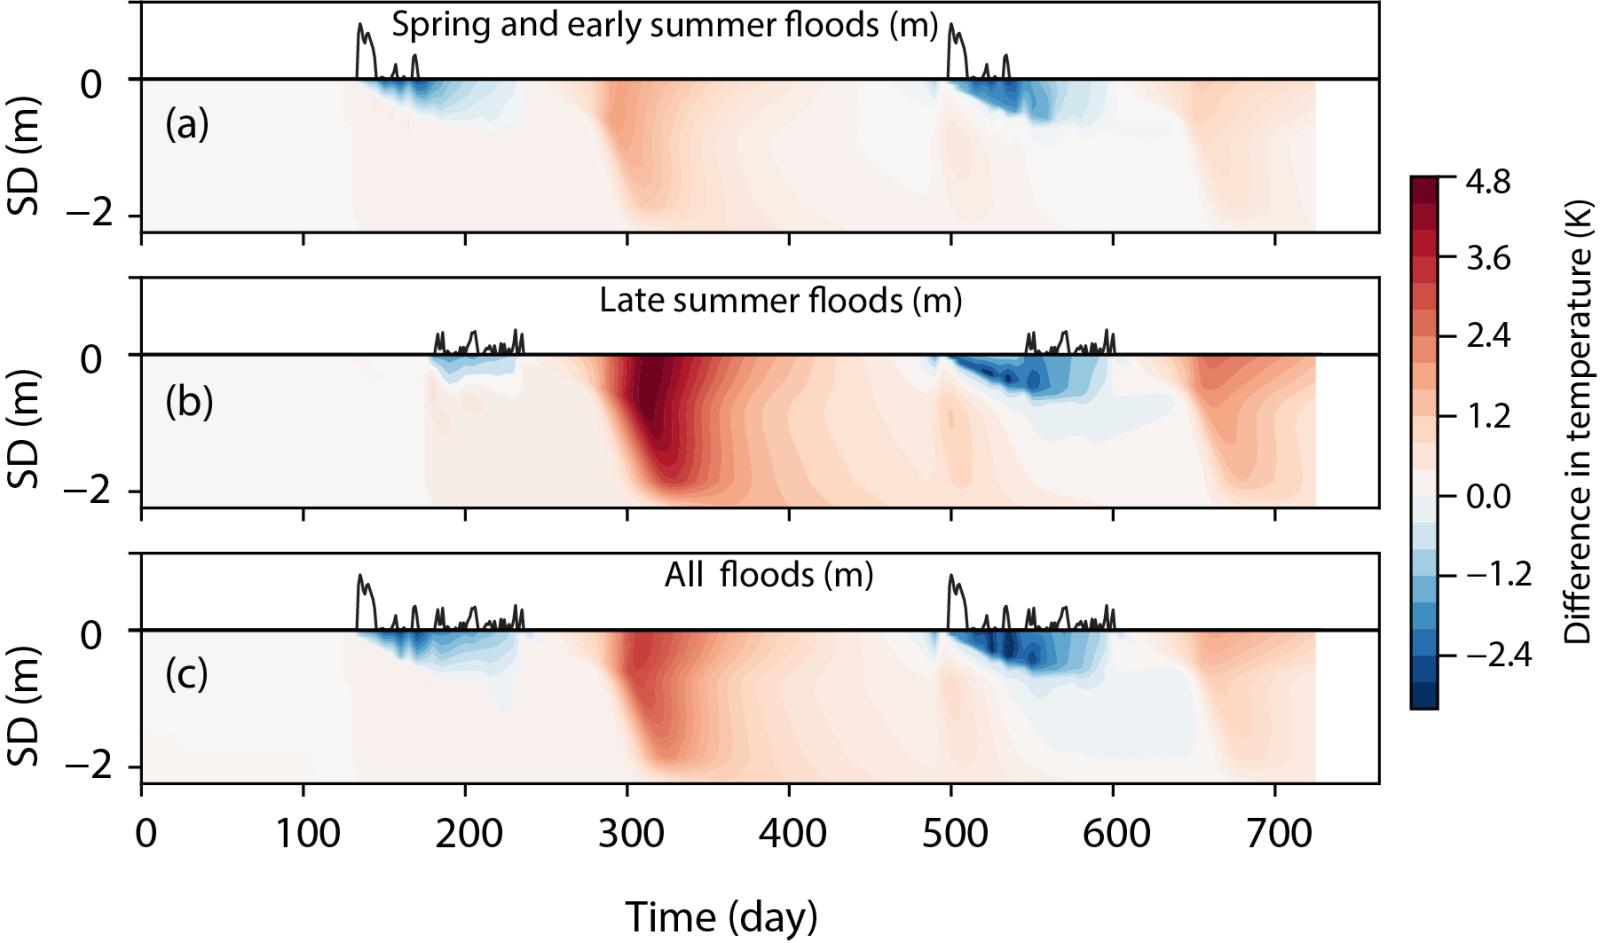 Charts of various flood types' changes in temperature over time